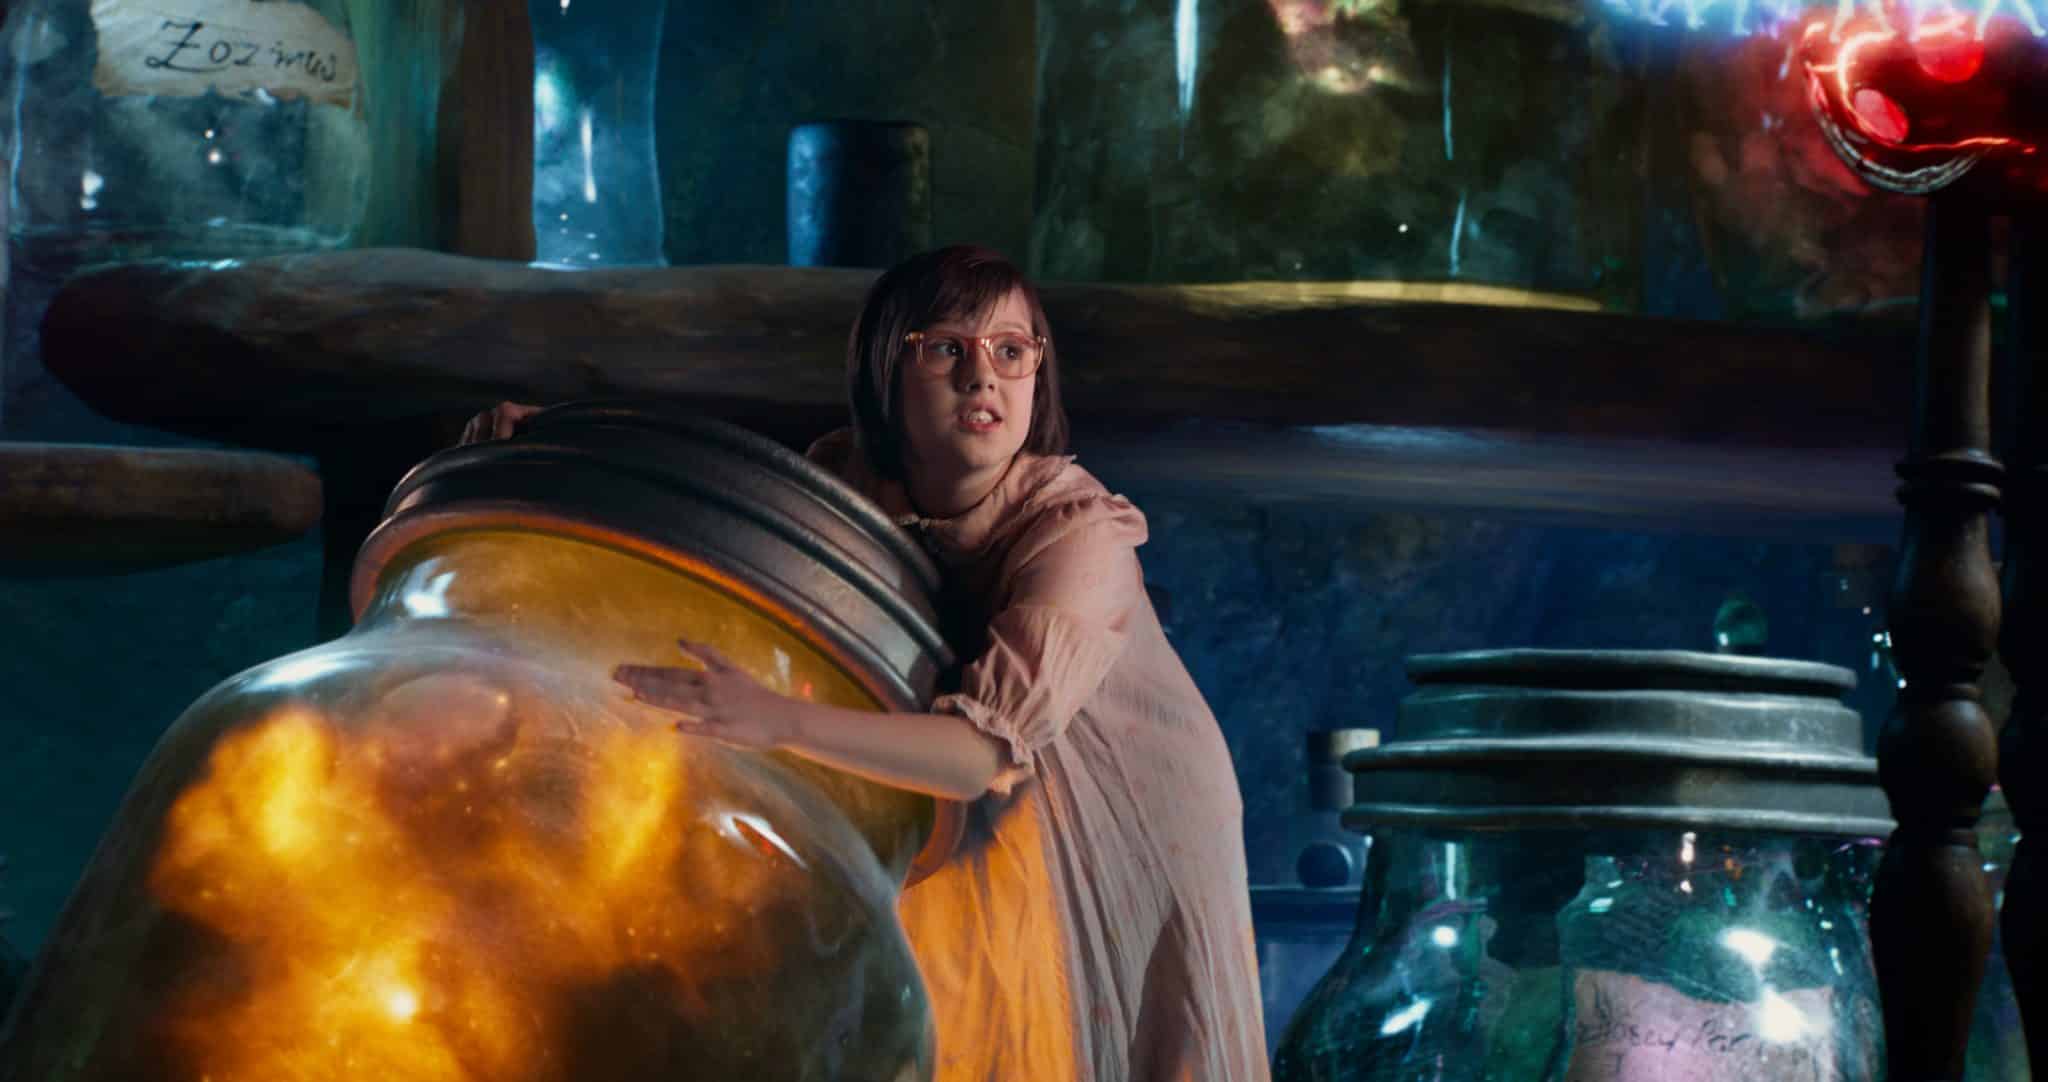 Disney's The BFG will be in theaters on July 1! #TheBFG